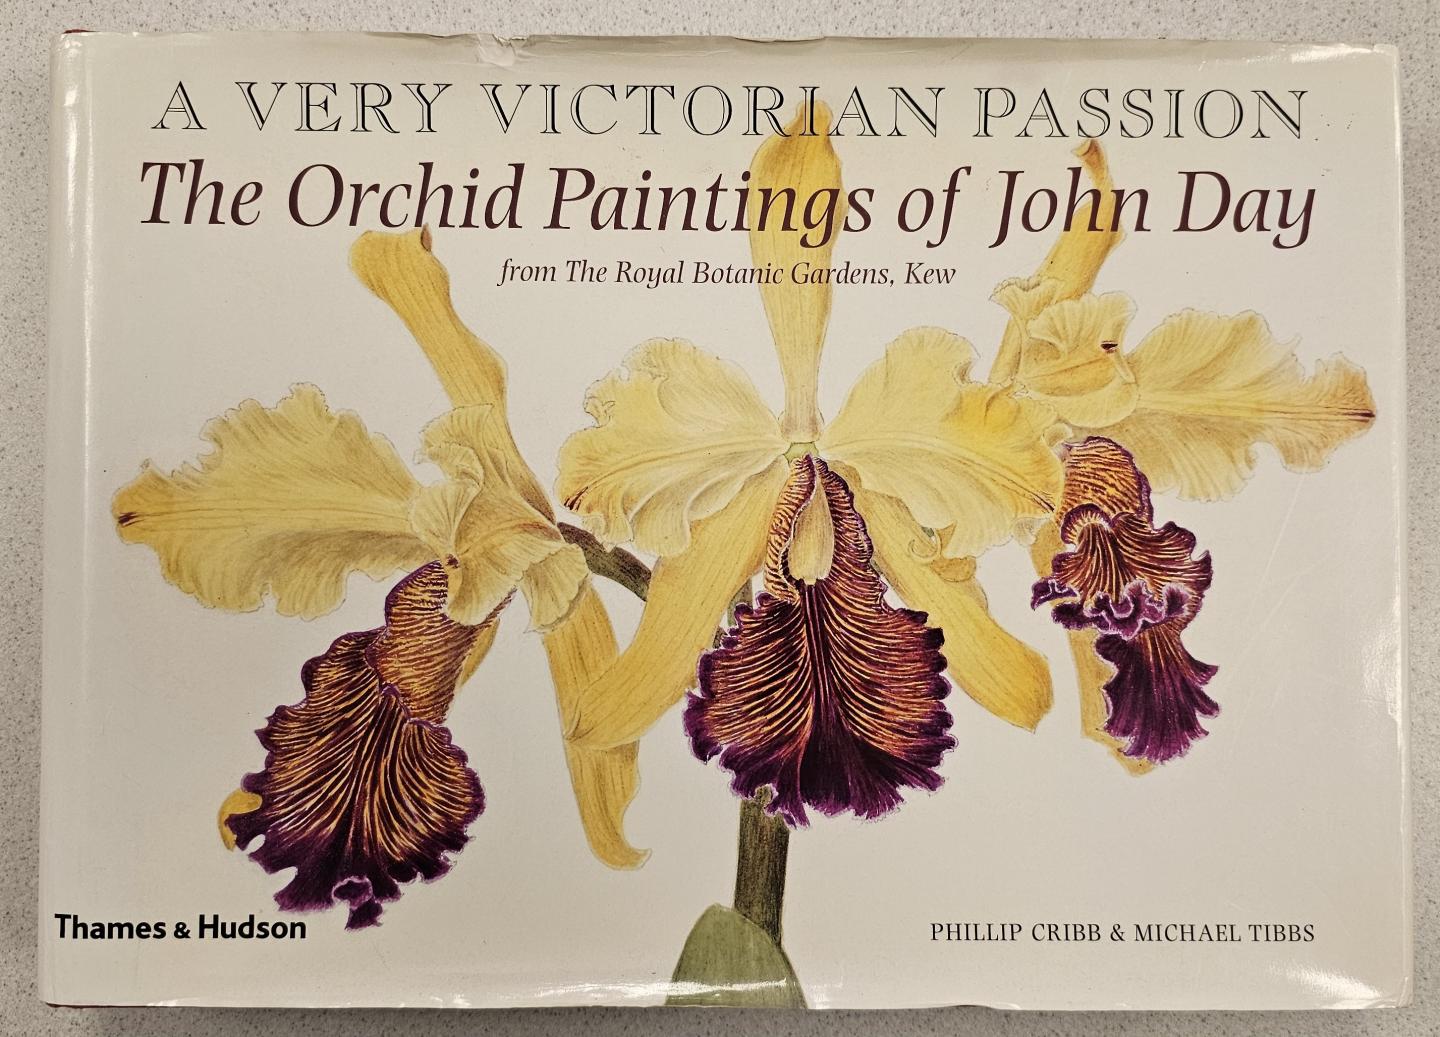 Day, John / Cribb, Phillip / Tibbs, Michael - A Very Victorian Passion [The Orchid Paintings of John Day from The Royal Botanic Gardens, Kew]